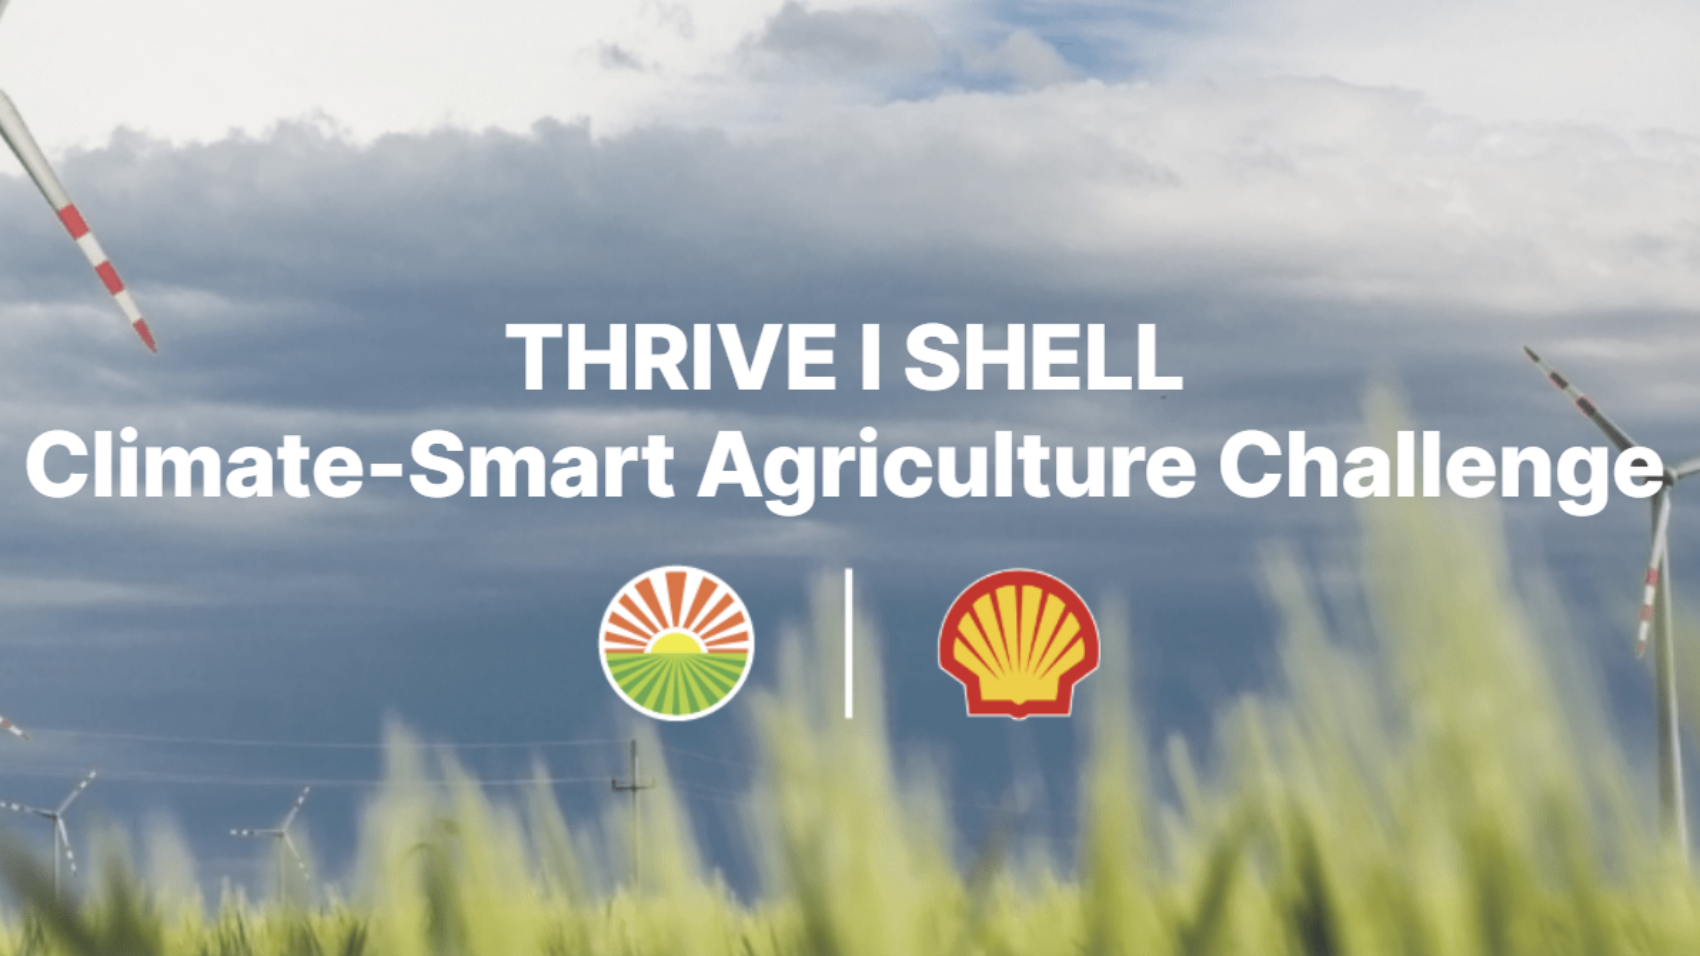 THRIVE | SHELL Climate-Smart Agriculture Challenge